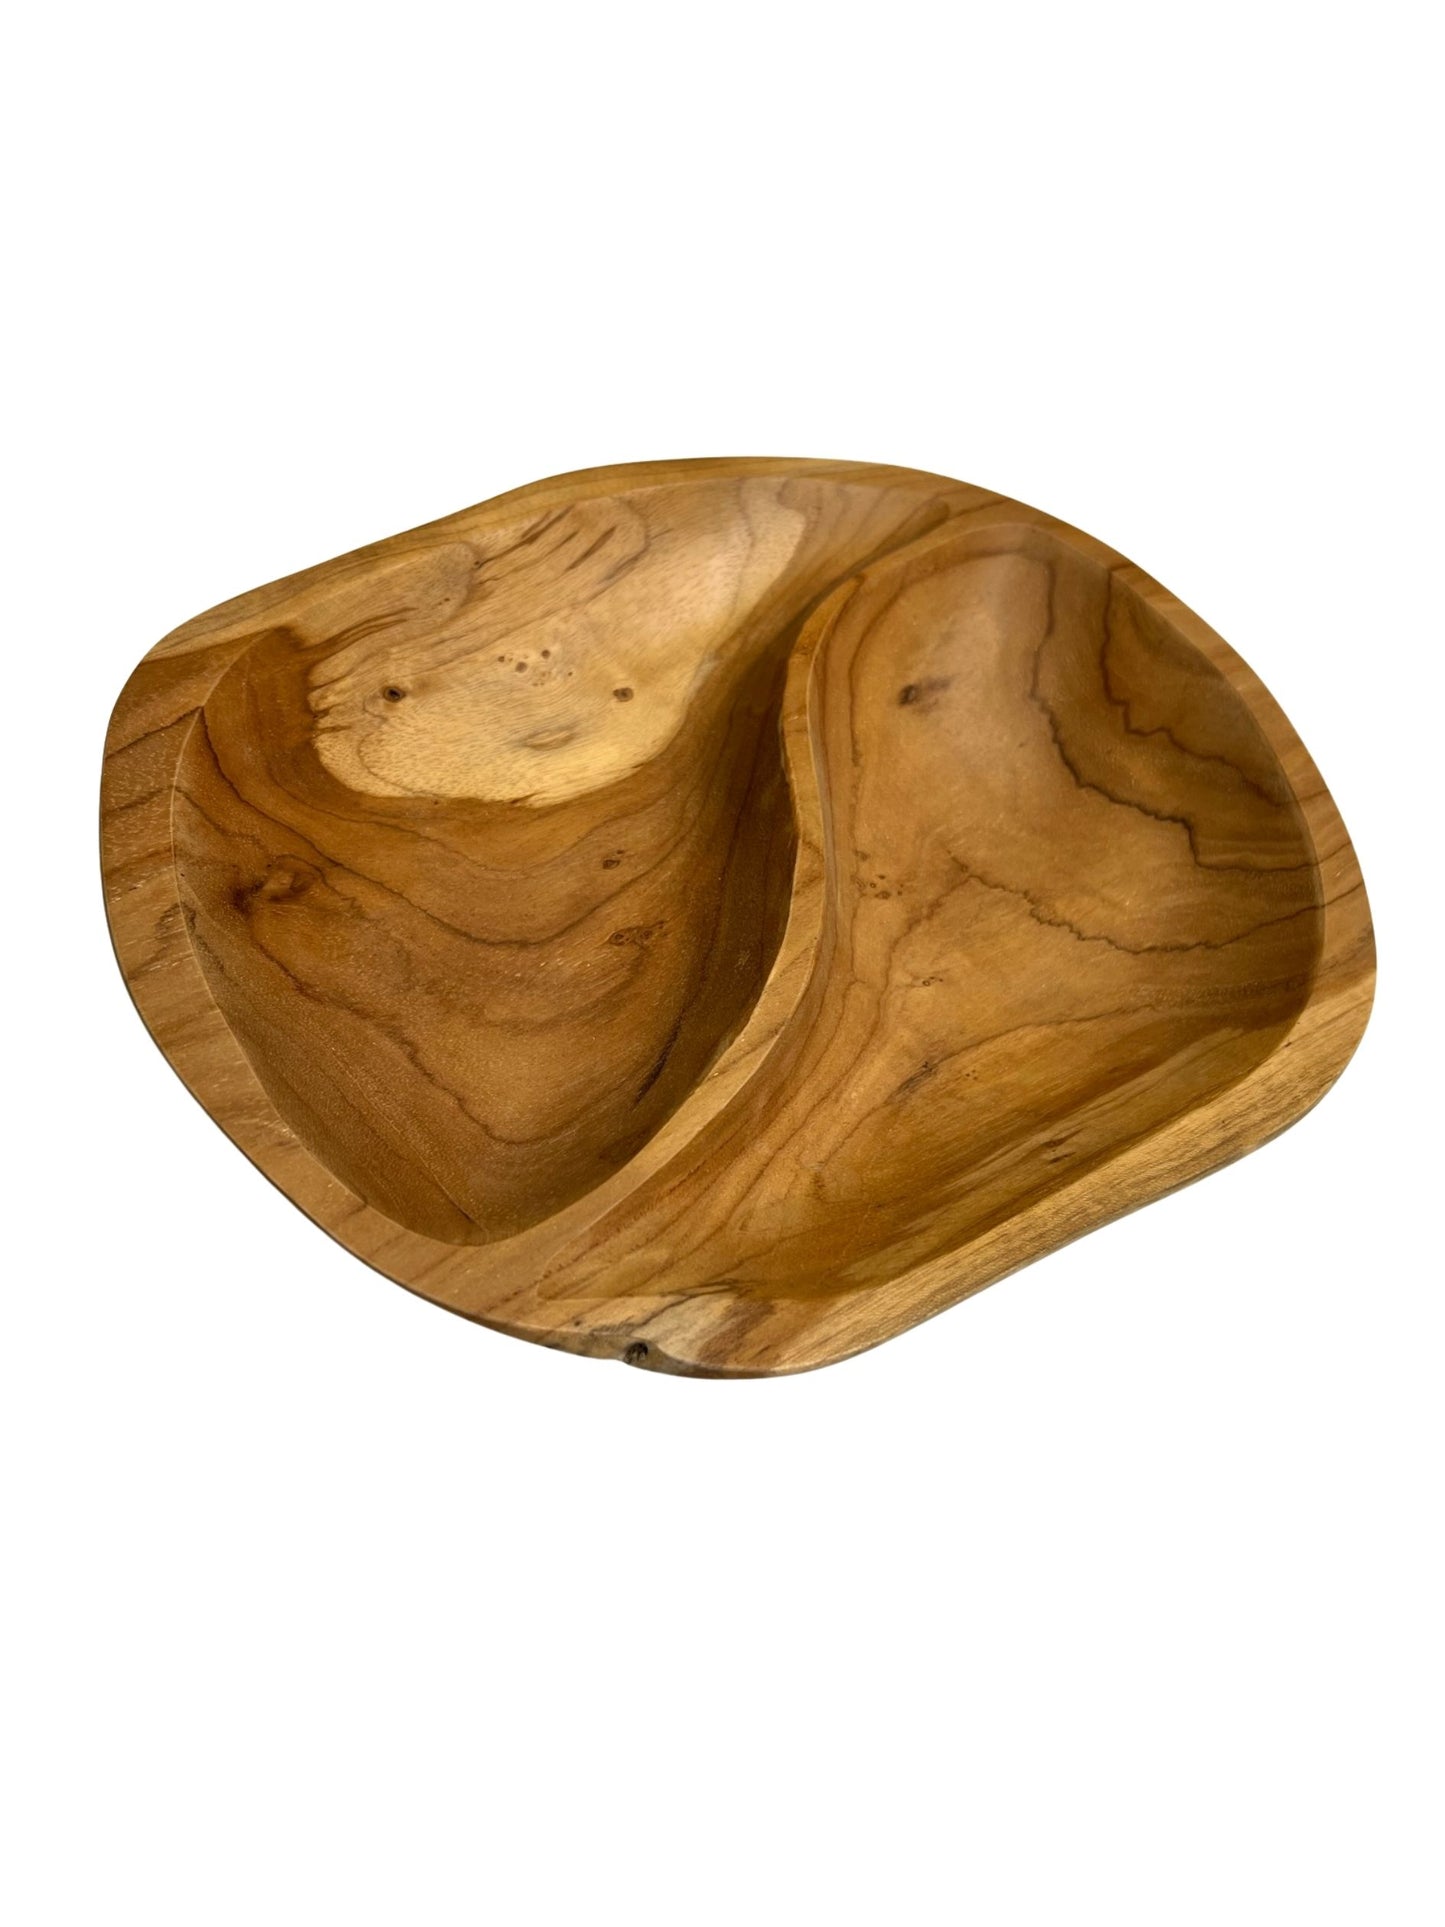 Eclectic Home Accent Teak Plate 2917 Natural  Decor Furniture